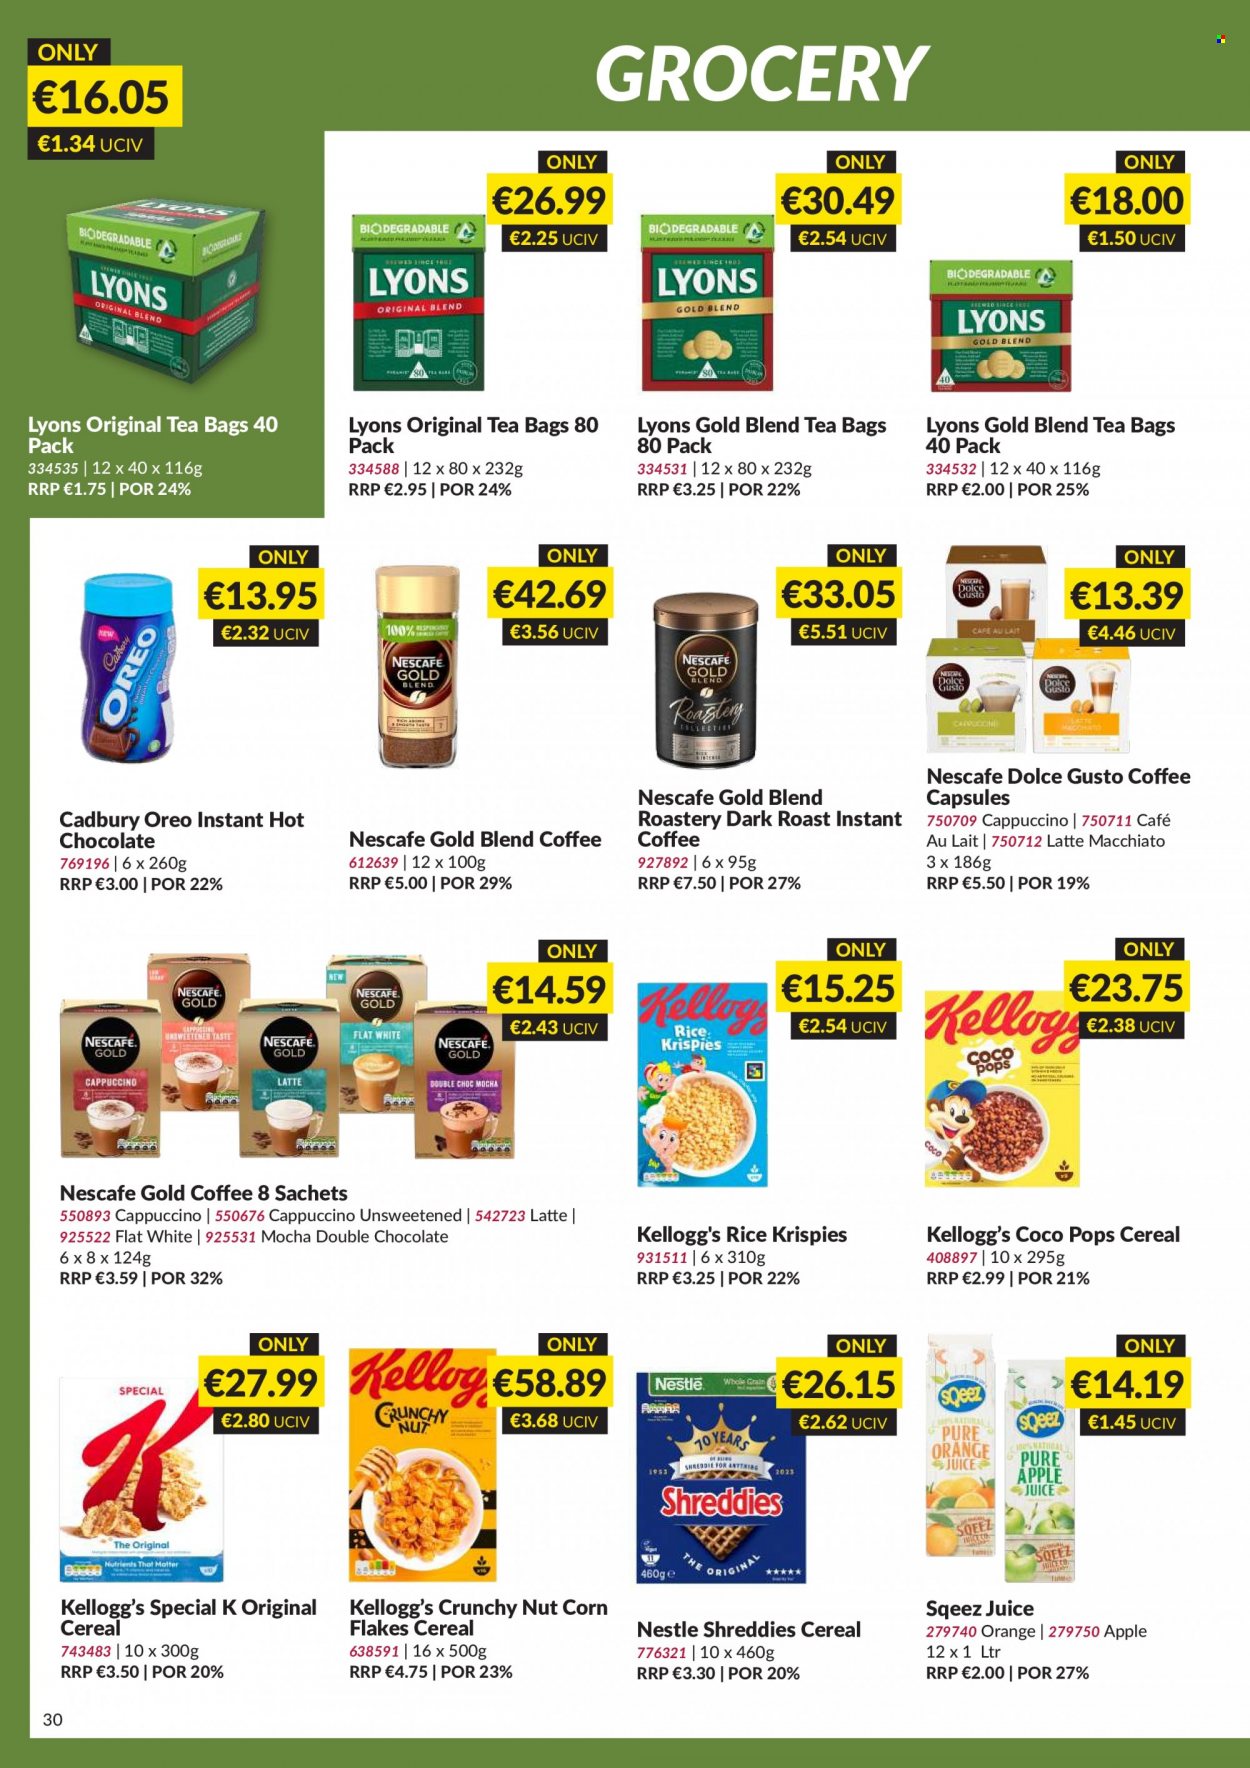 thumbnail - MUSGRAVE Market Place offer  - 04.06.2023 - 01.07.2023 - Sales products - oranges, Oreo, Nestlé, Kellogg's, Cadbury, cereals, corn flakes, coco pops, Rice Krispies, juice, hot chocolate, tea bags, Lyons, cappuccino, coffee, instant coffee, Nescafé, Dolce Gusto, coffee capsules. Page 30.